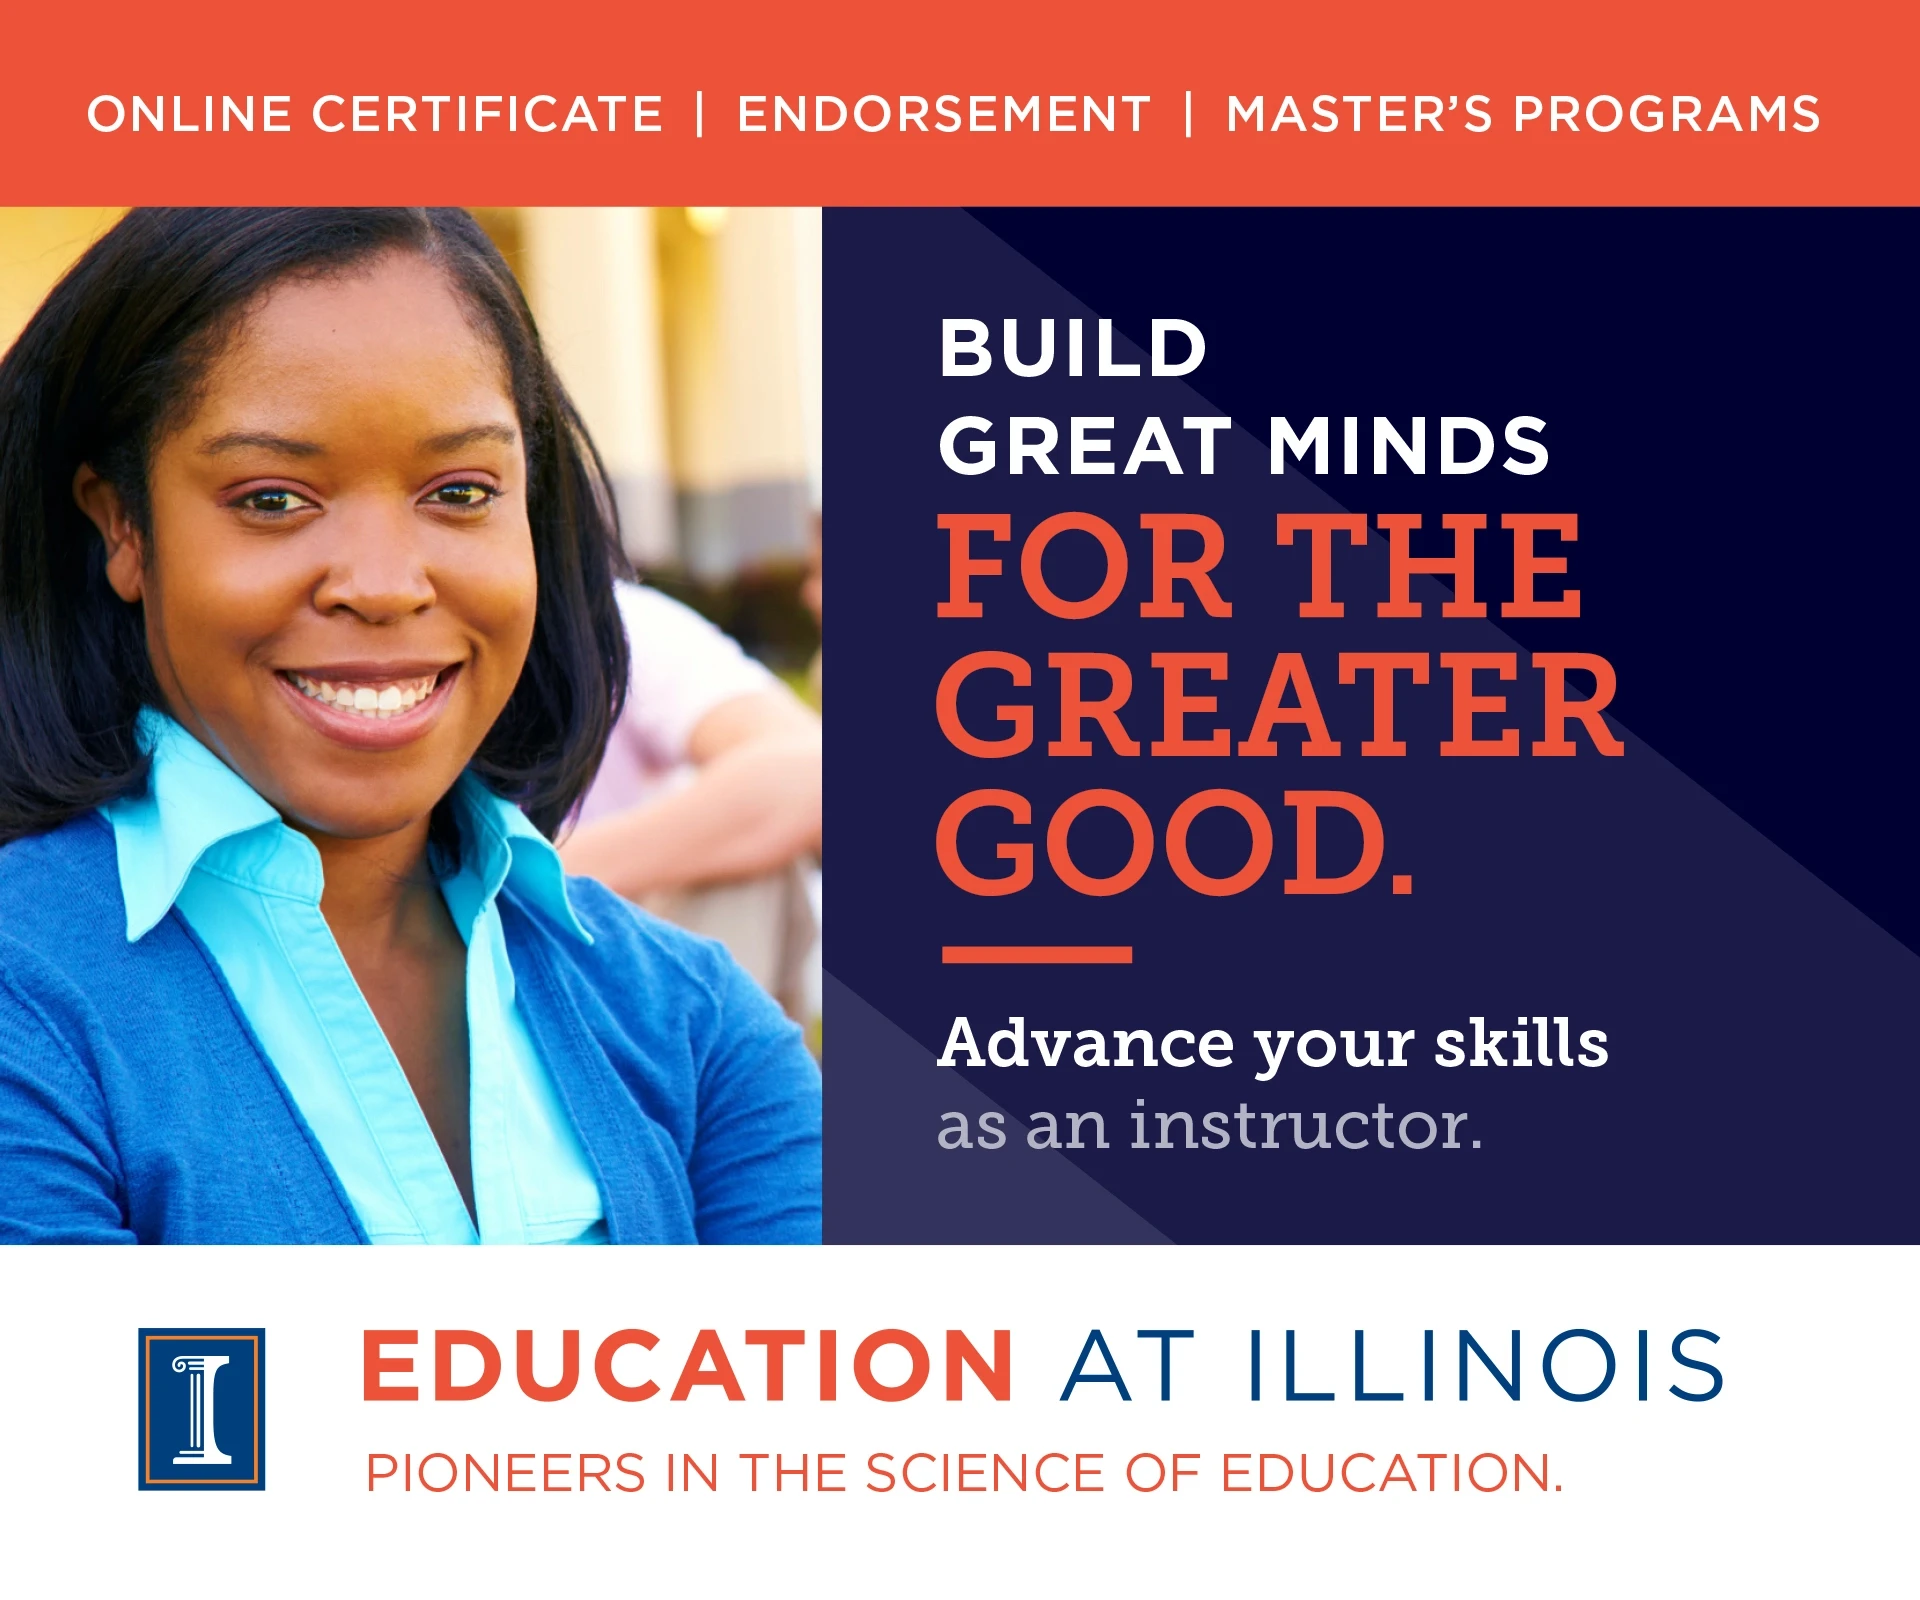 Illinois education - build great minds for the greater good.